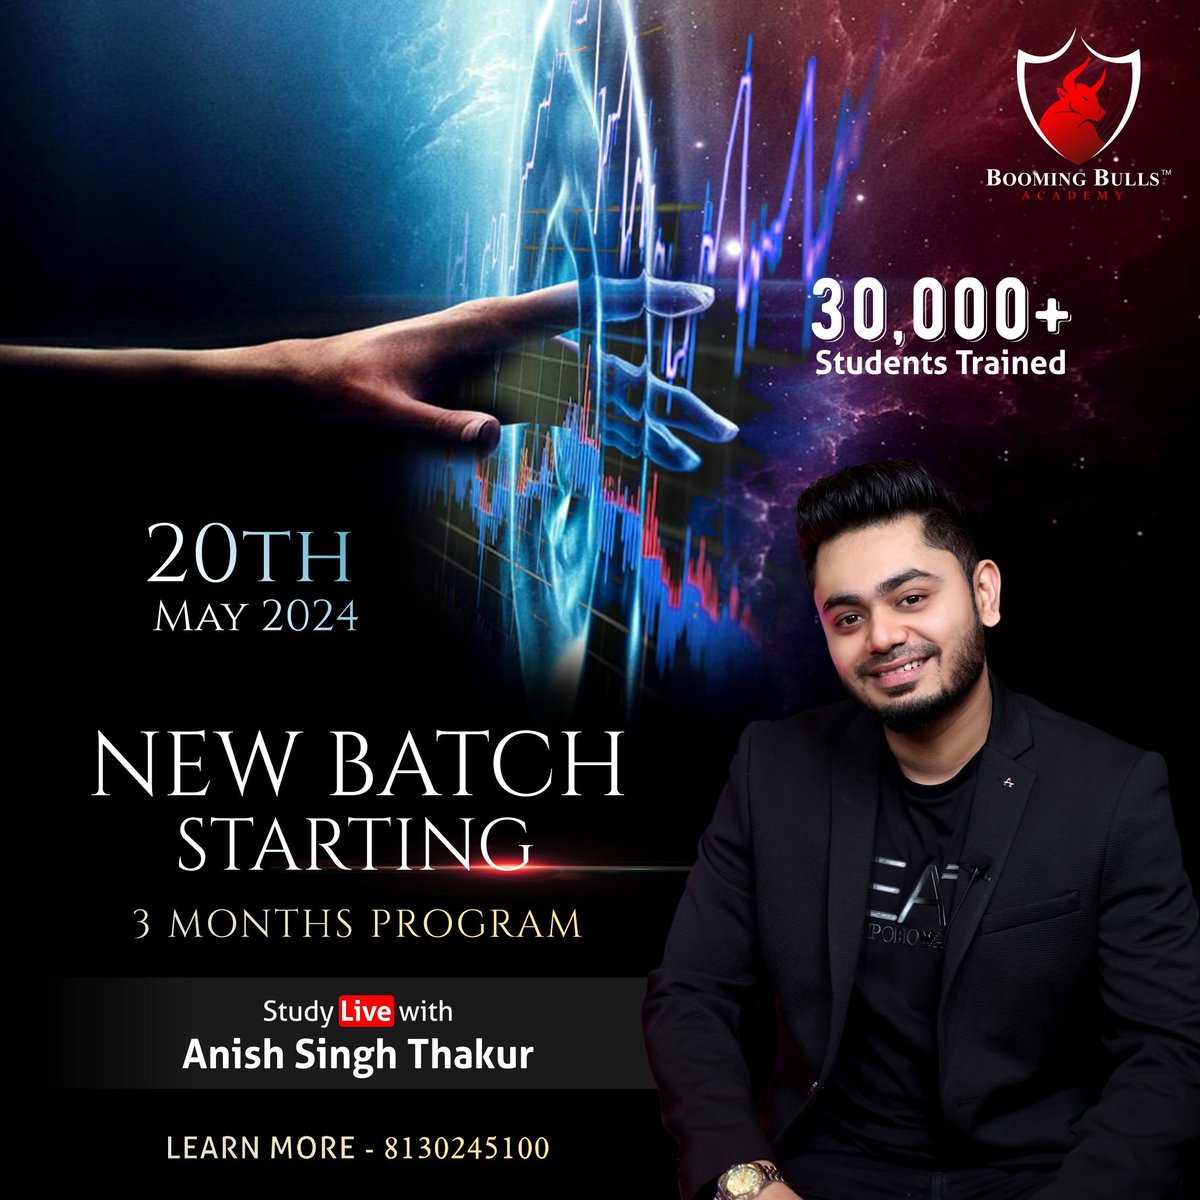 Grab the opportunity now! ✨Our new stock market training batch is on the way.
 Learn from the expert in a structured way and grow in your trading career 📊

#batch #financialeducation #stockmarketeducation  #boomingbulls #boomingbullsacademy #stocks   #forextrading #StockMarket